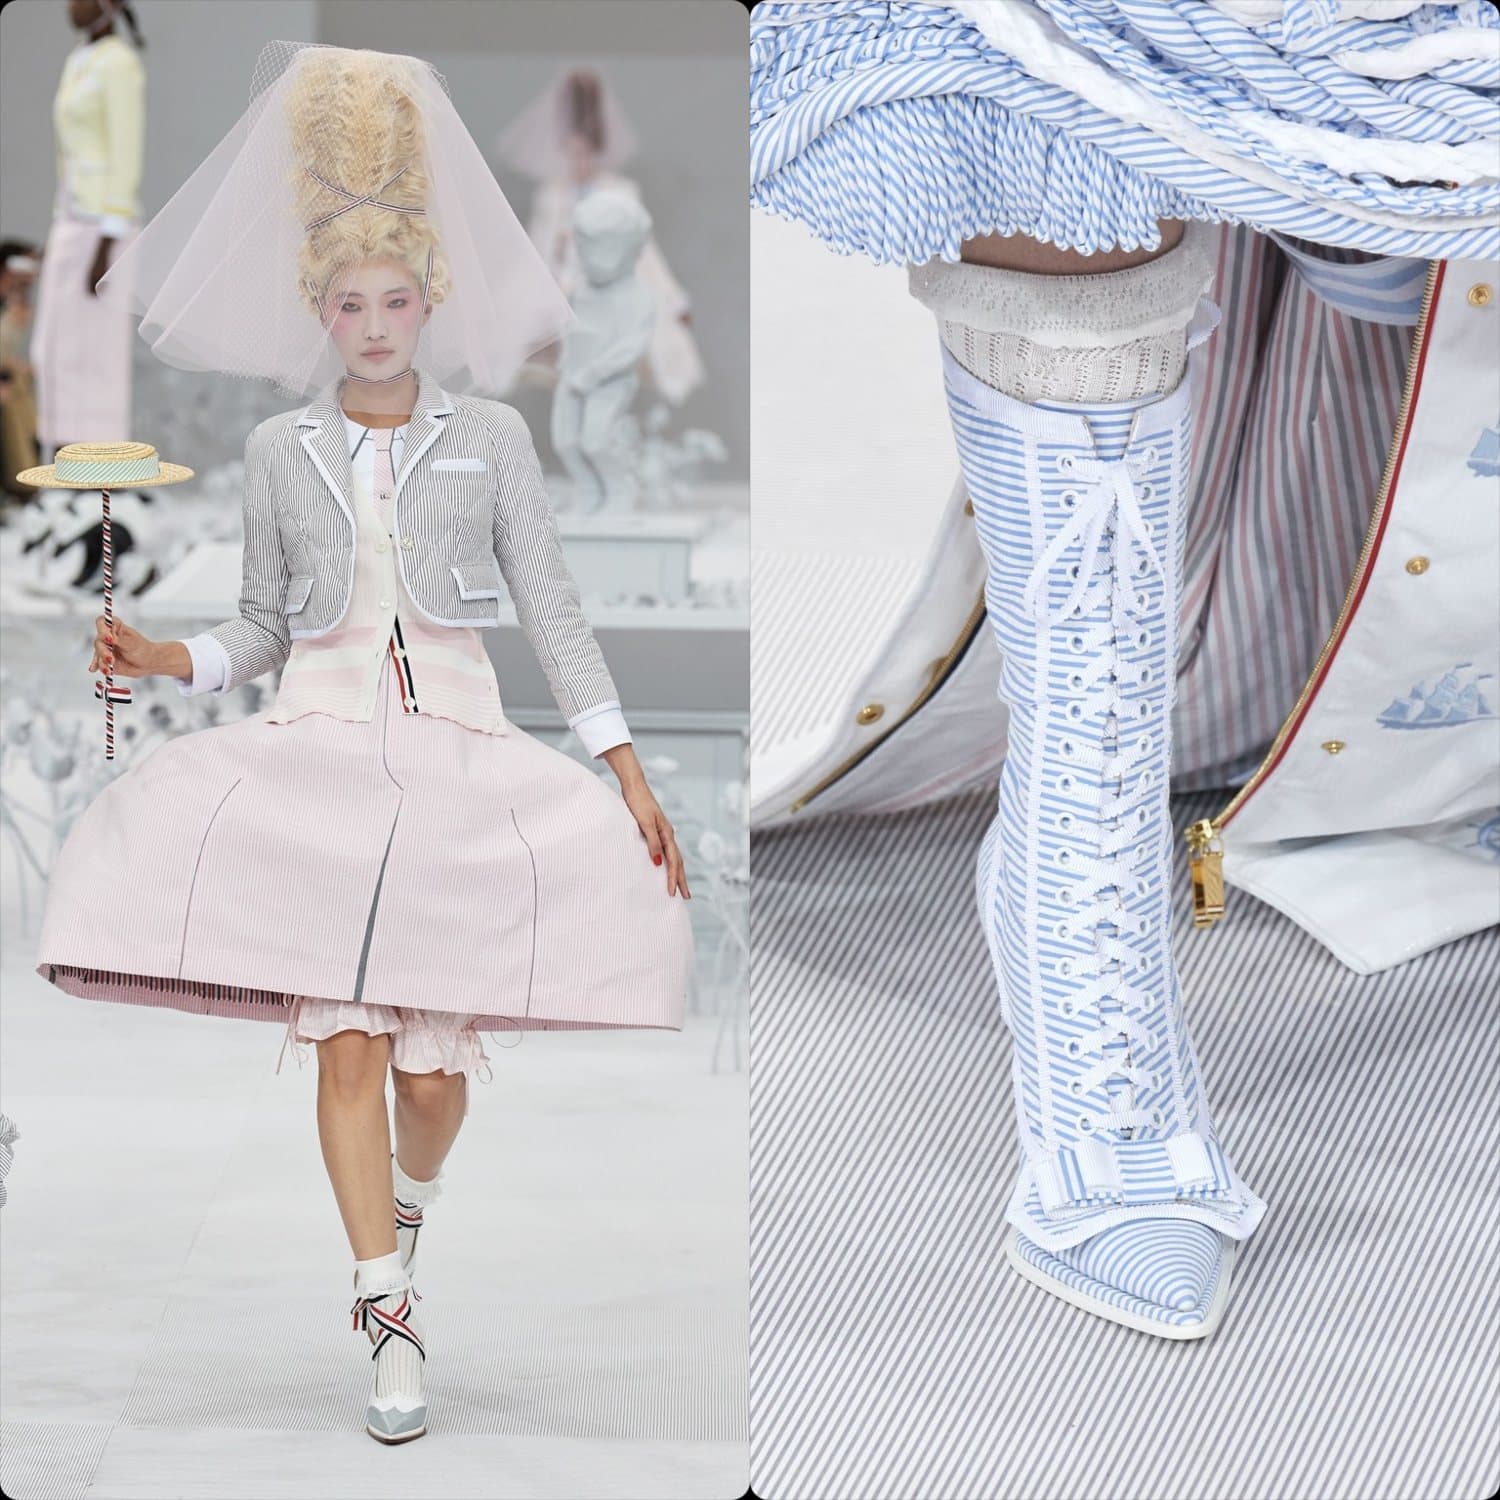 Thom Browne Spring Summer 2020 Ready-to-Wear Paris by RUNWAY MAGAZINE ® Collections. RUNWAY NOW / RUNWAY NEW